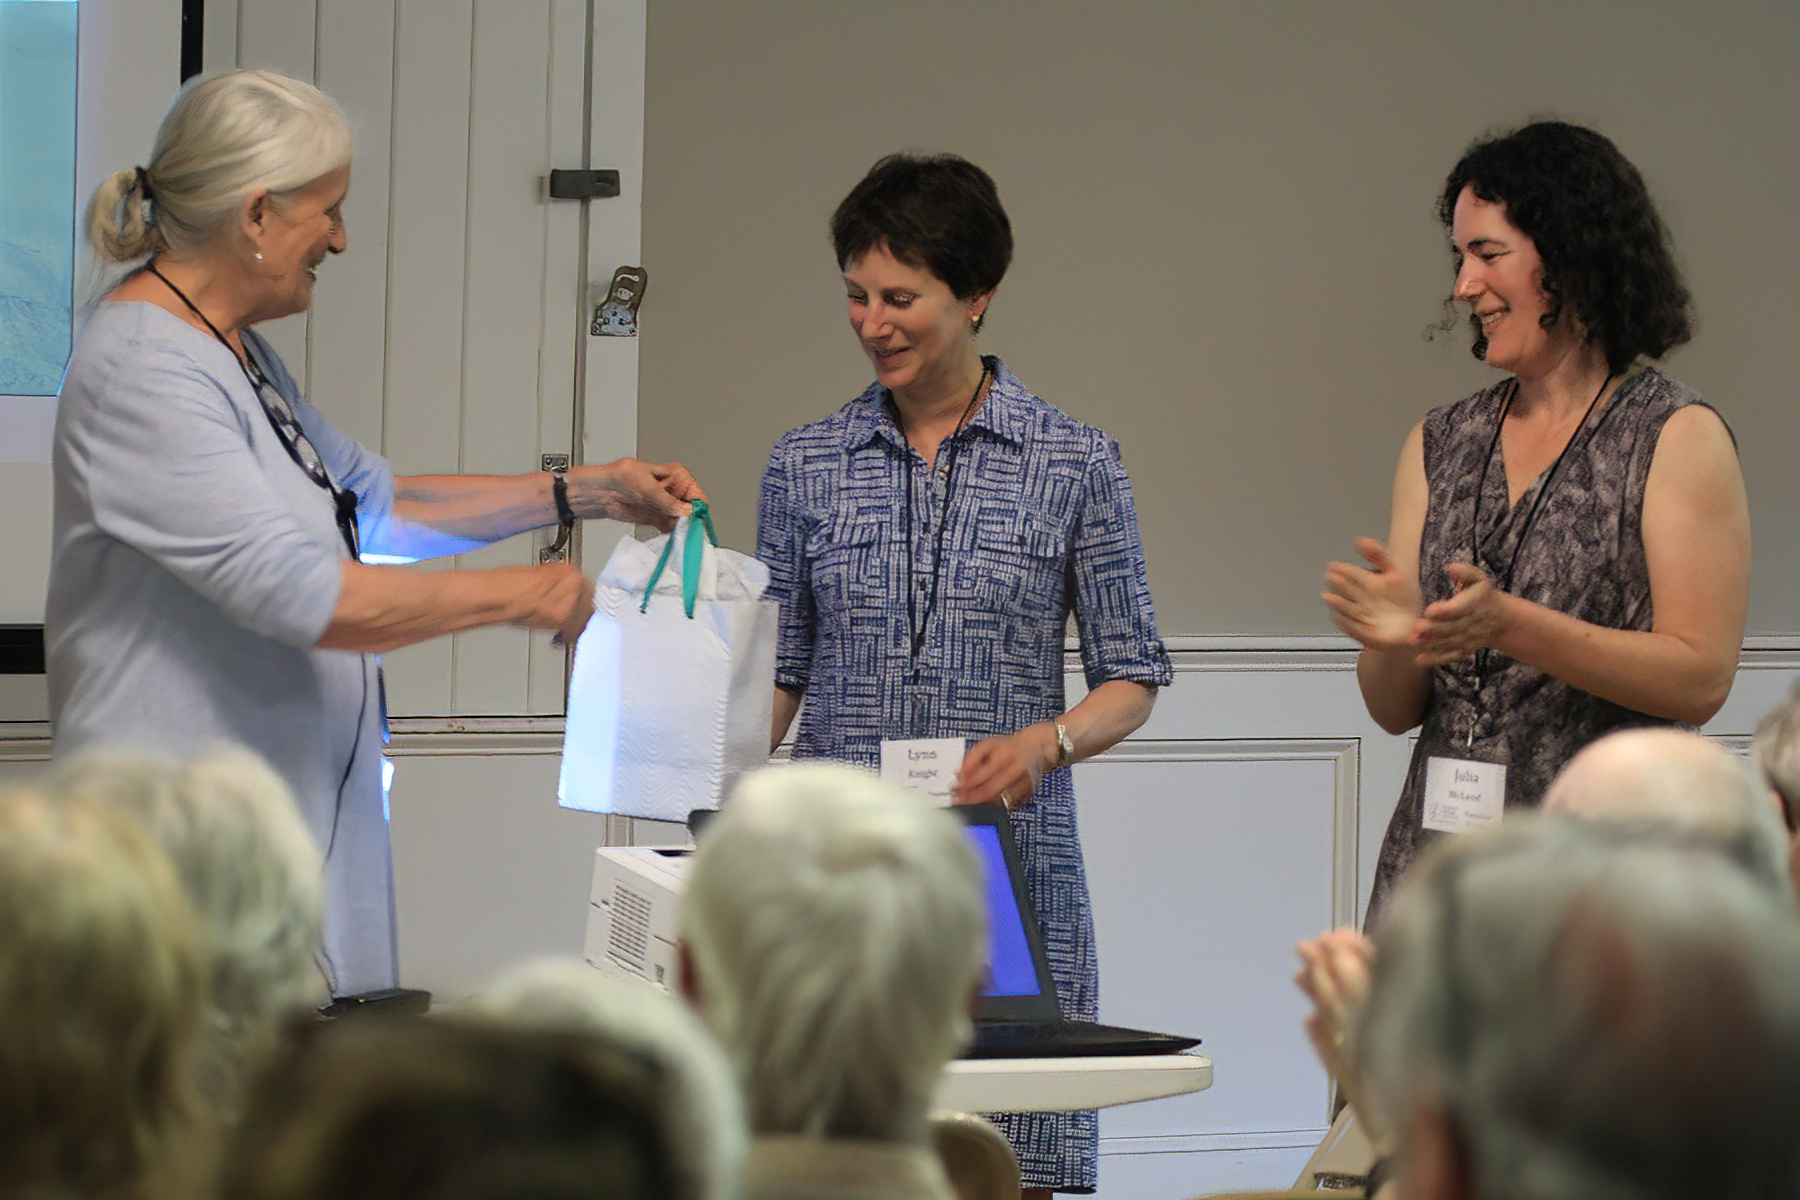 two women present a third woman with a bagged gift in front of crowd